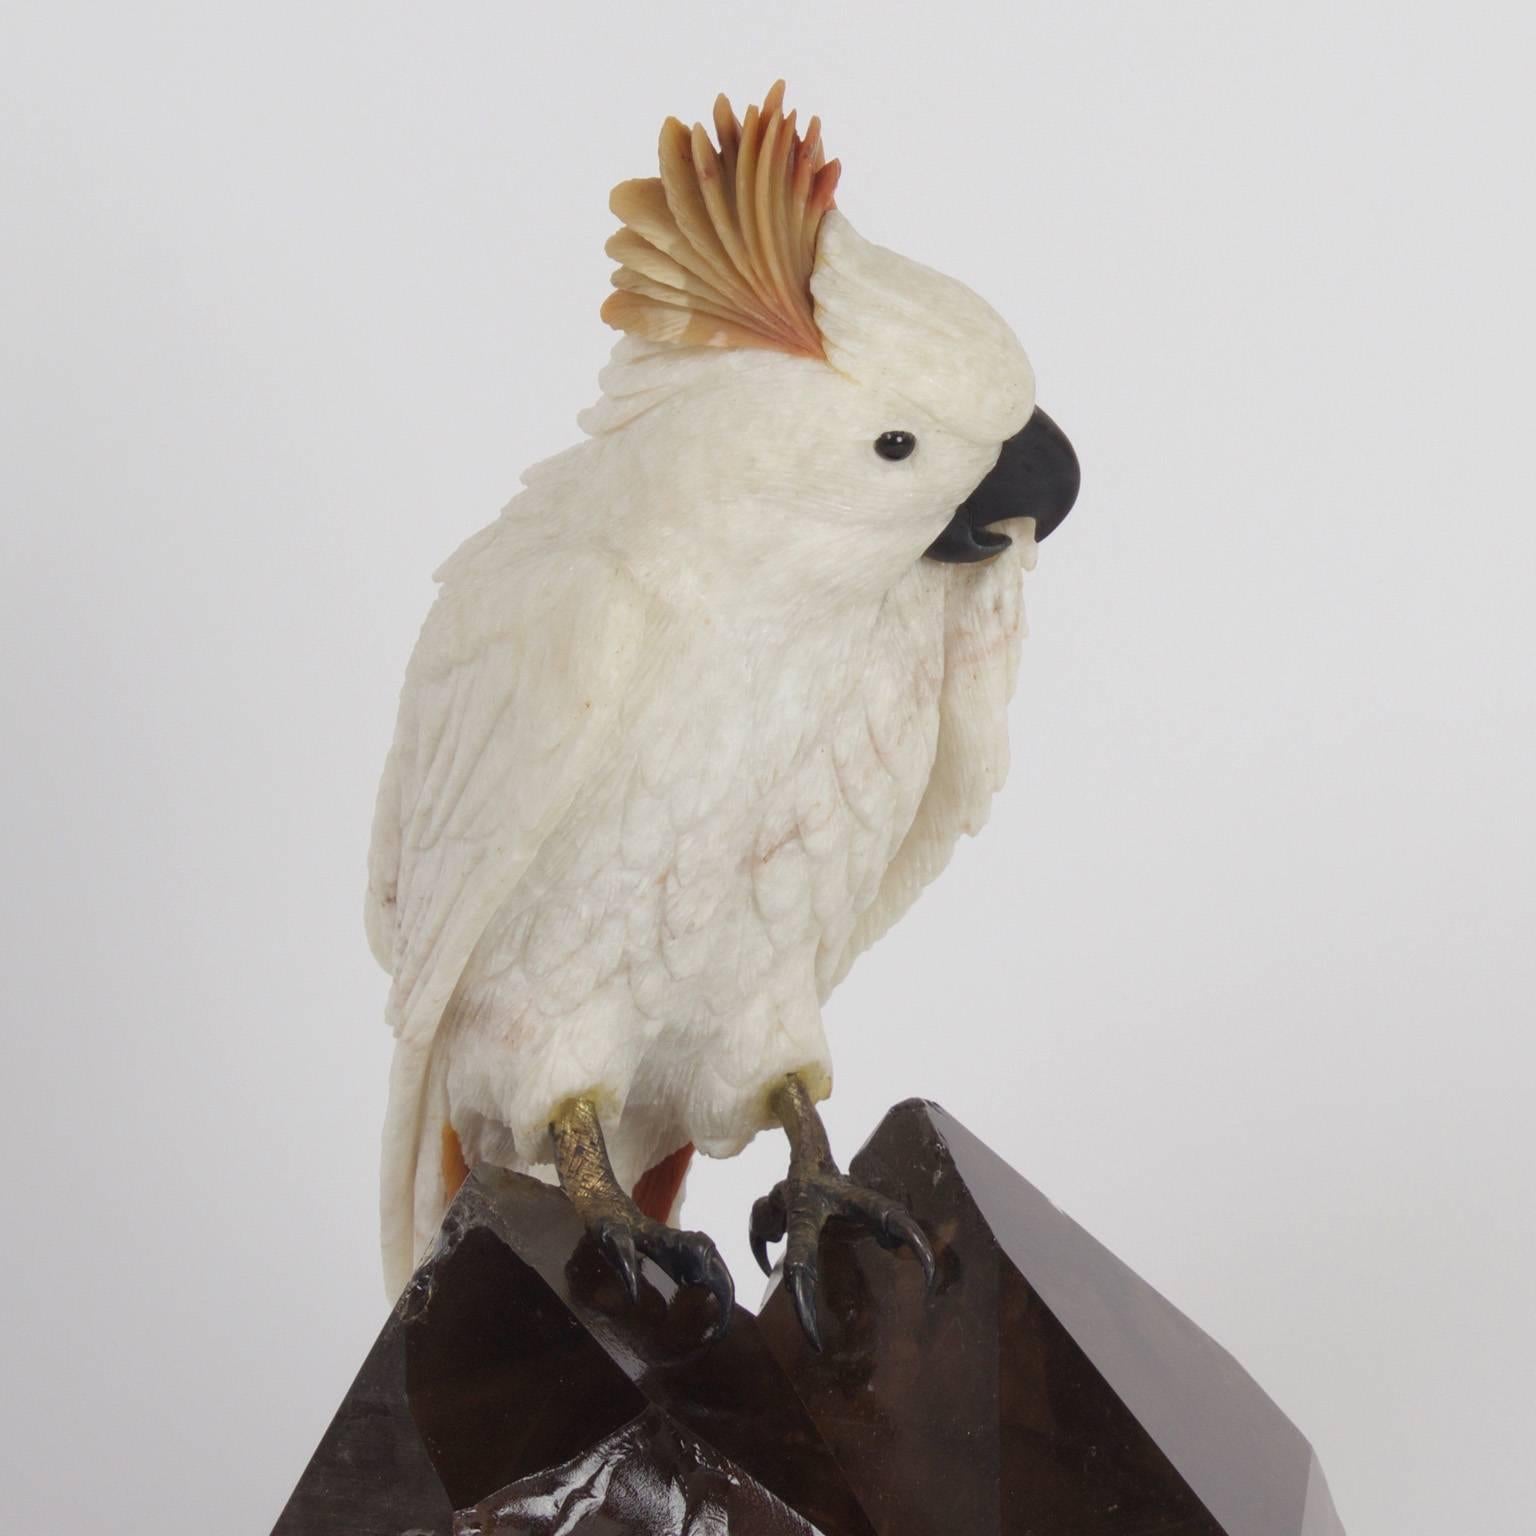 Amusing carved stone cockatoo with a quirky expression and brass feet mounted on an impressive smoky quartz specimen.

